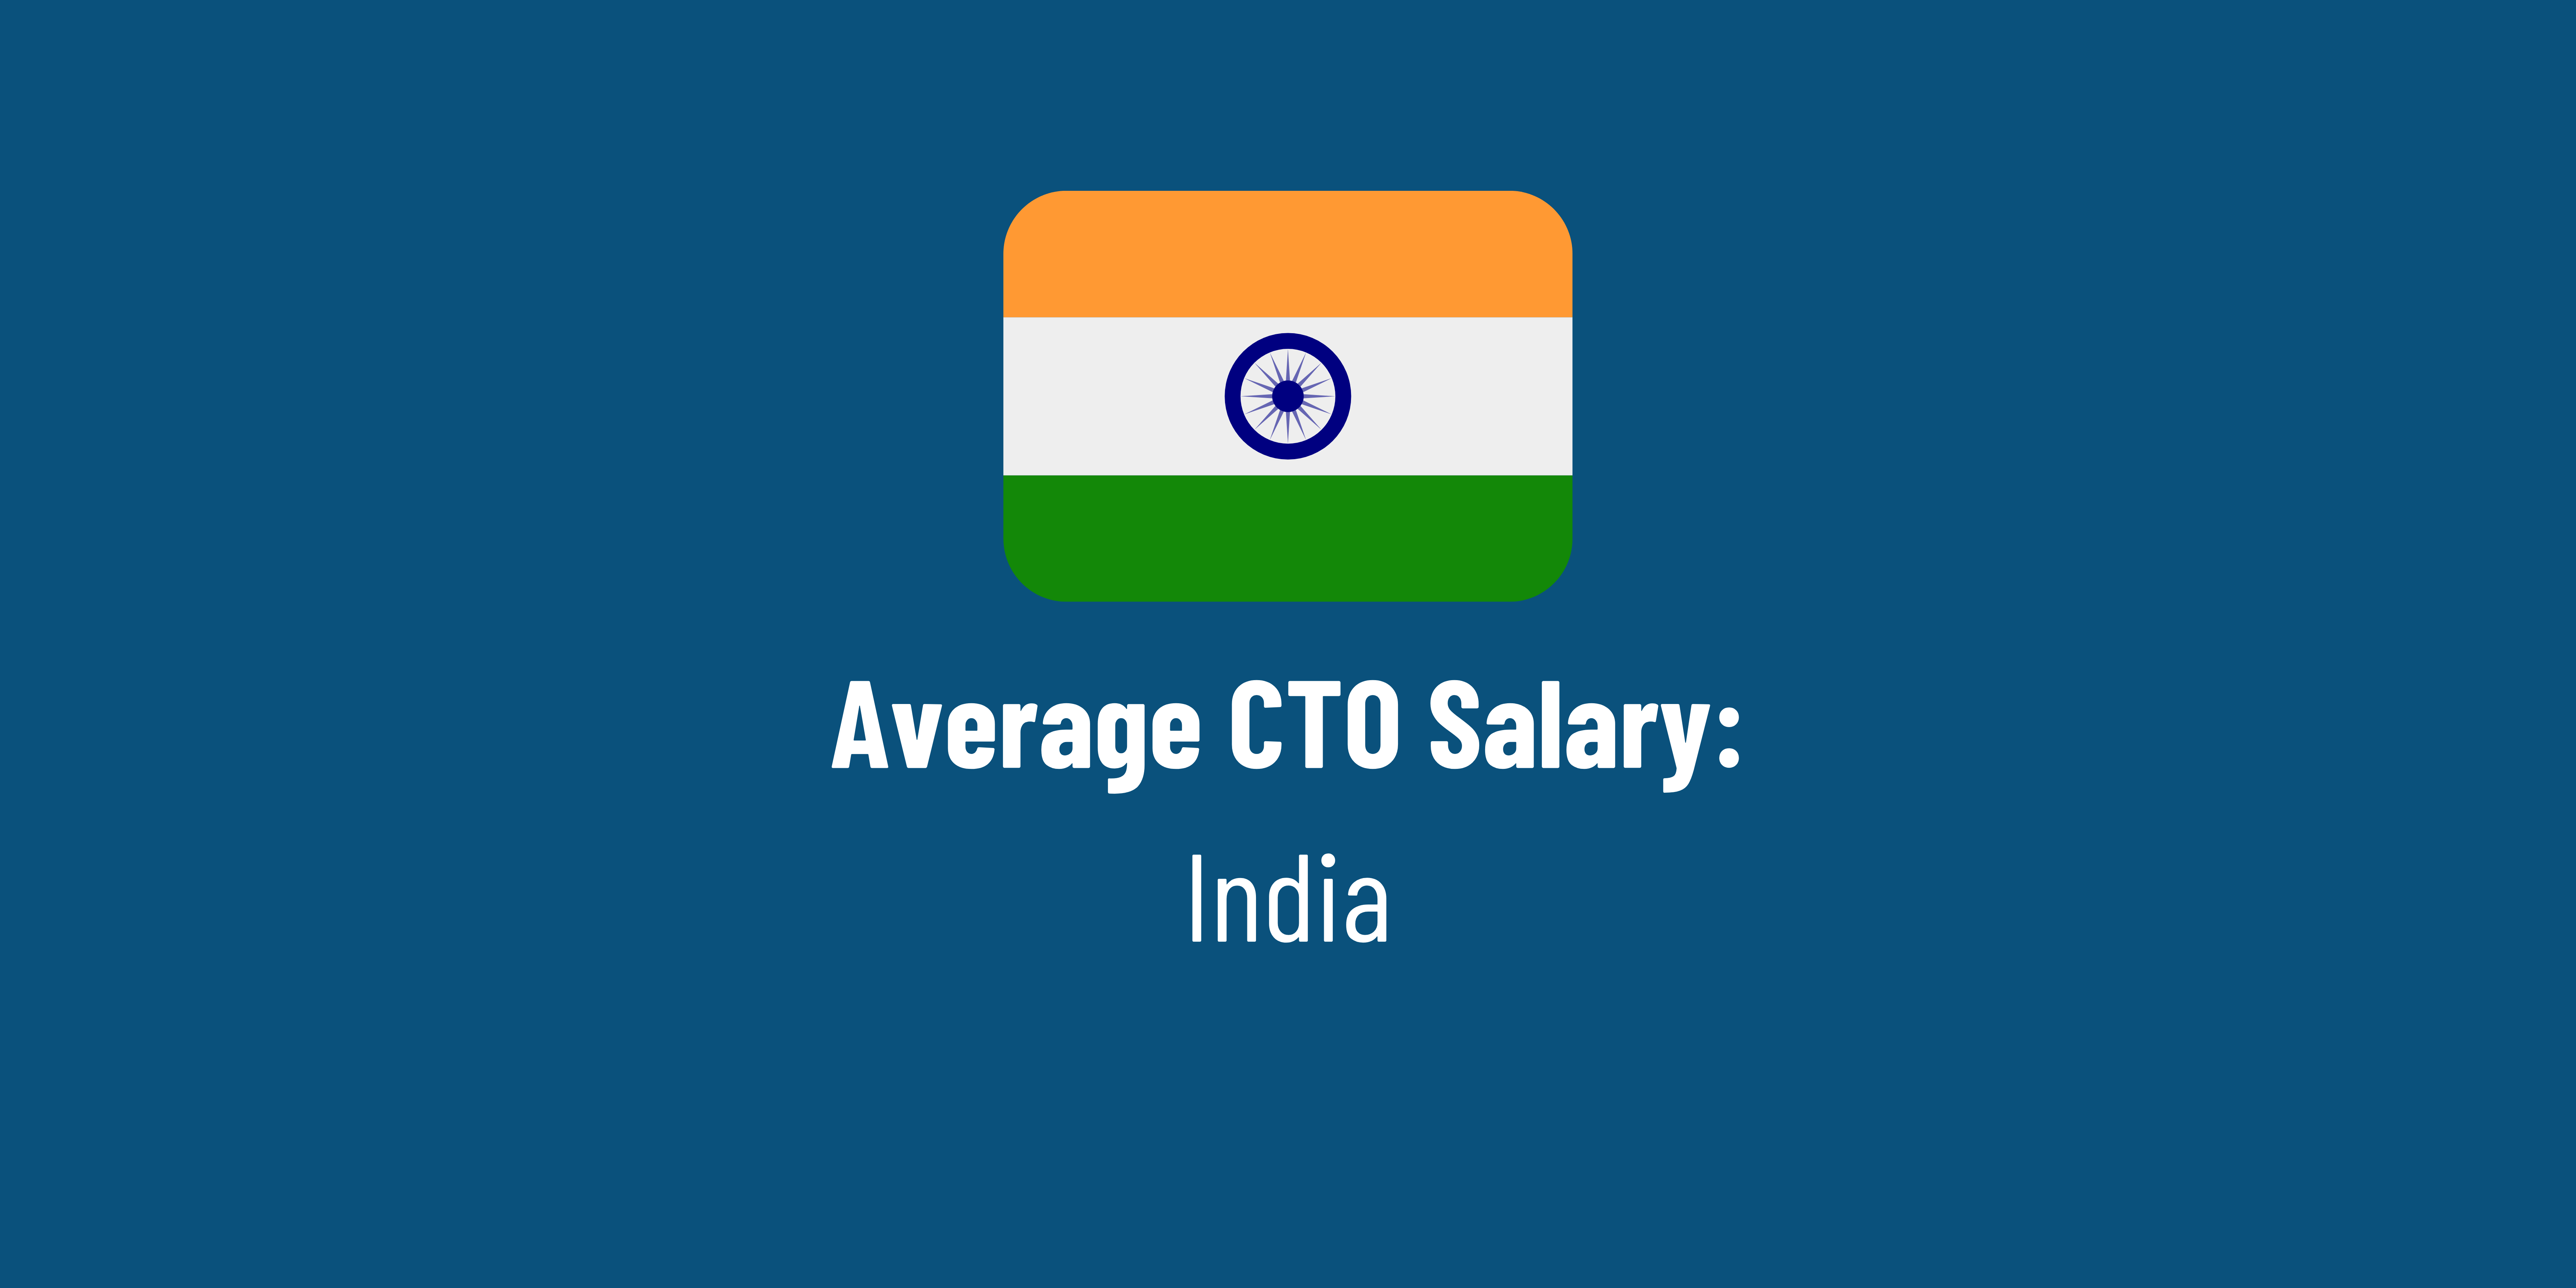 What is the average CTO salary in India?